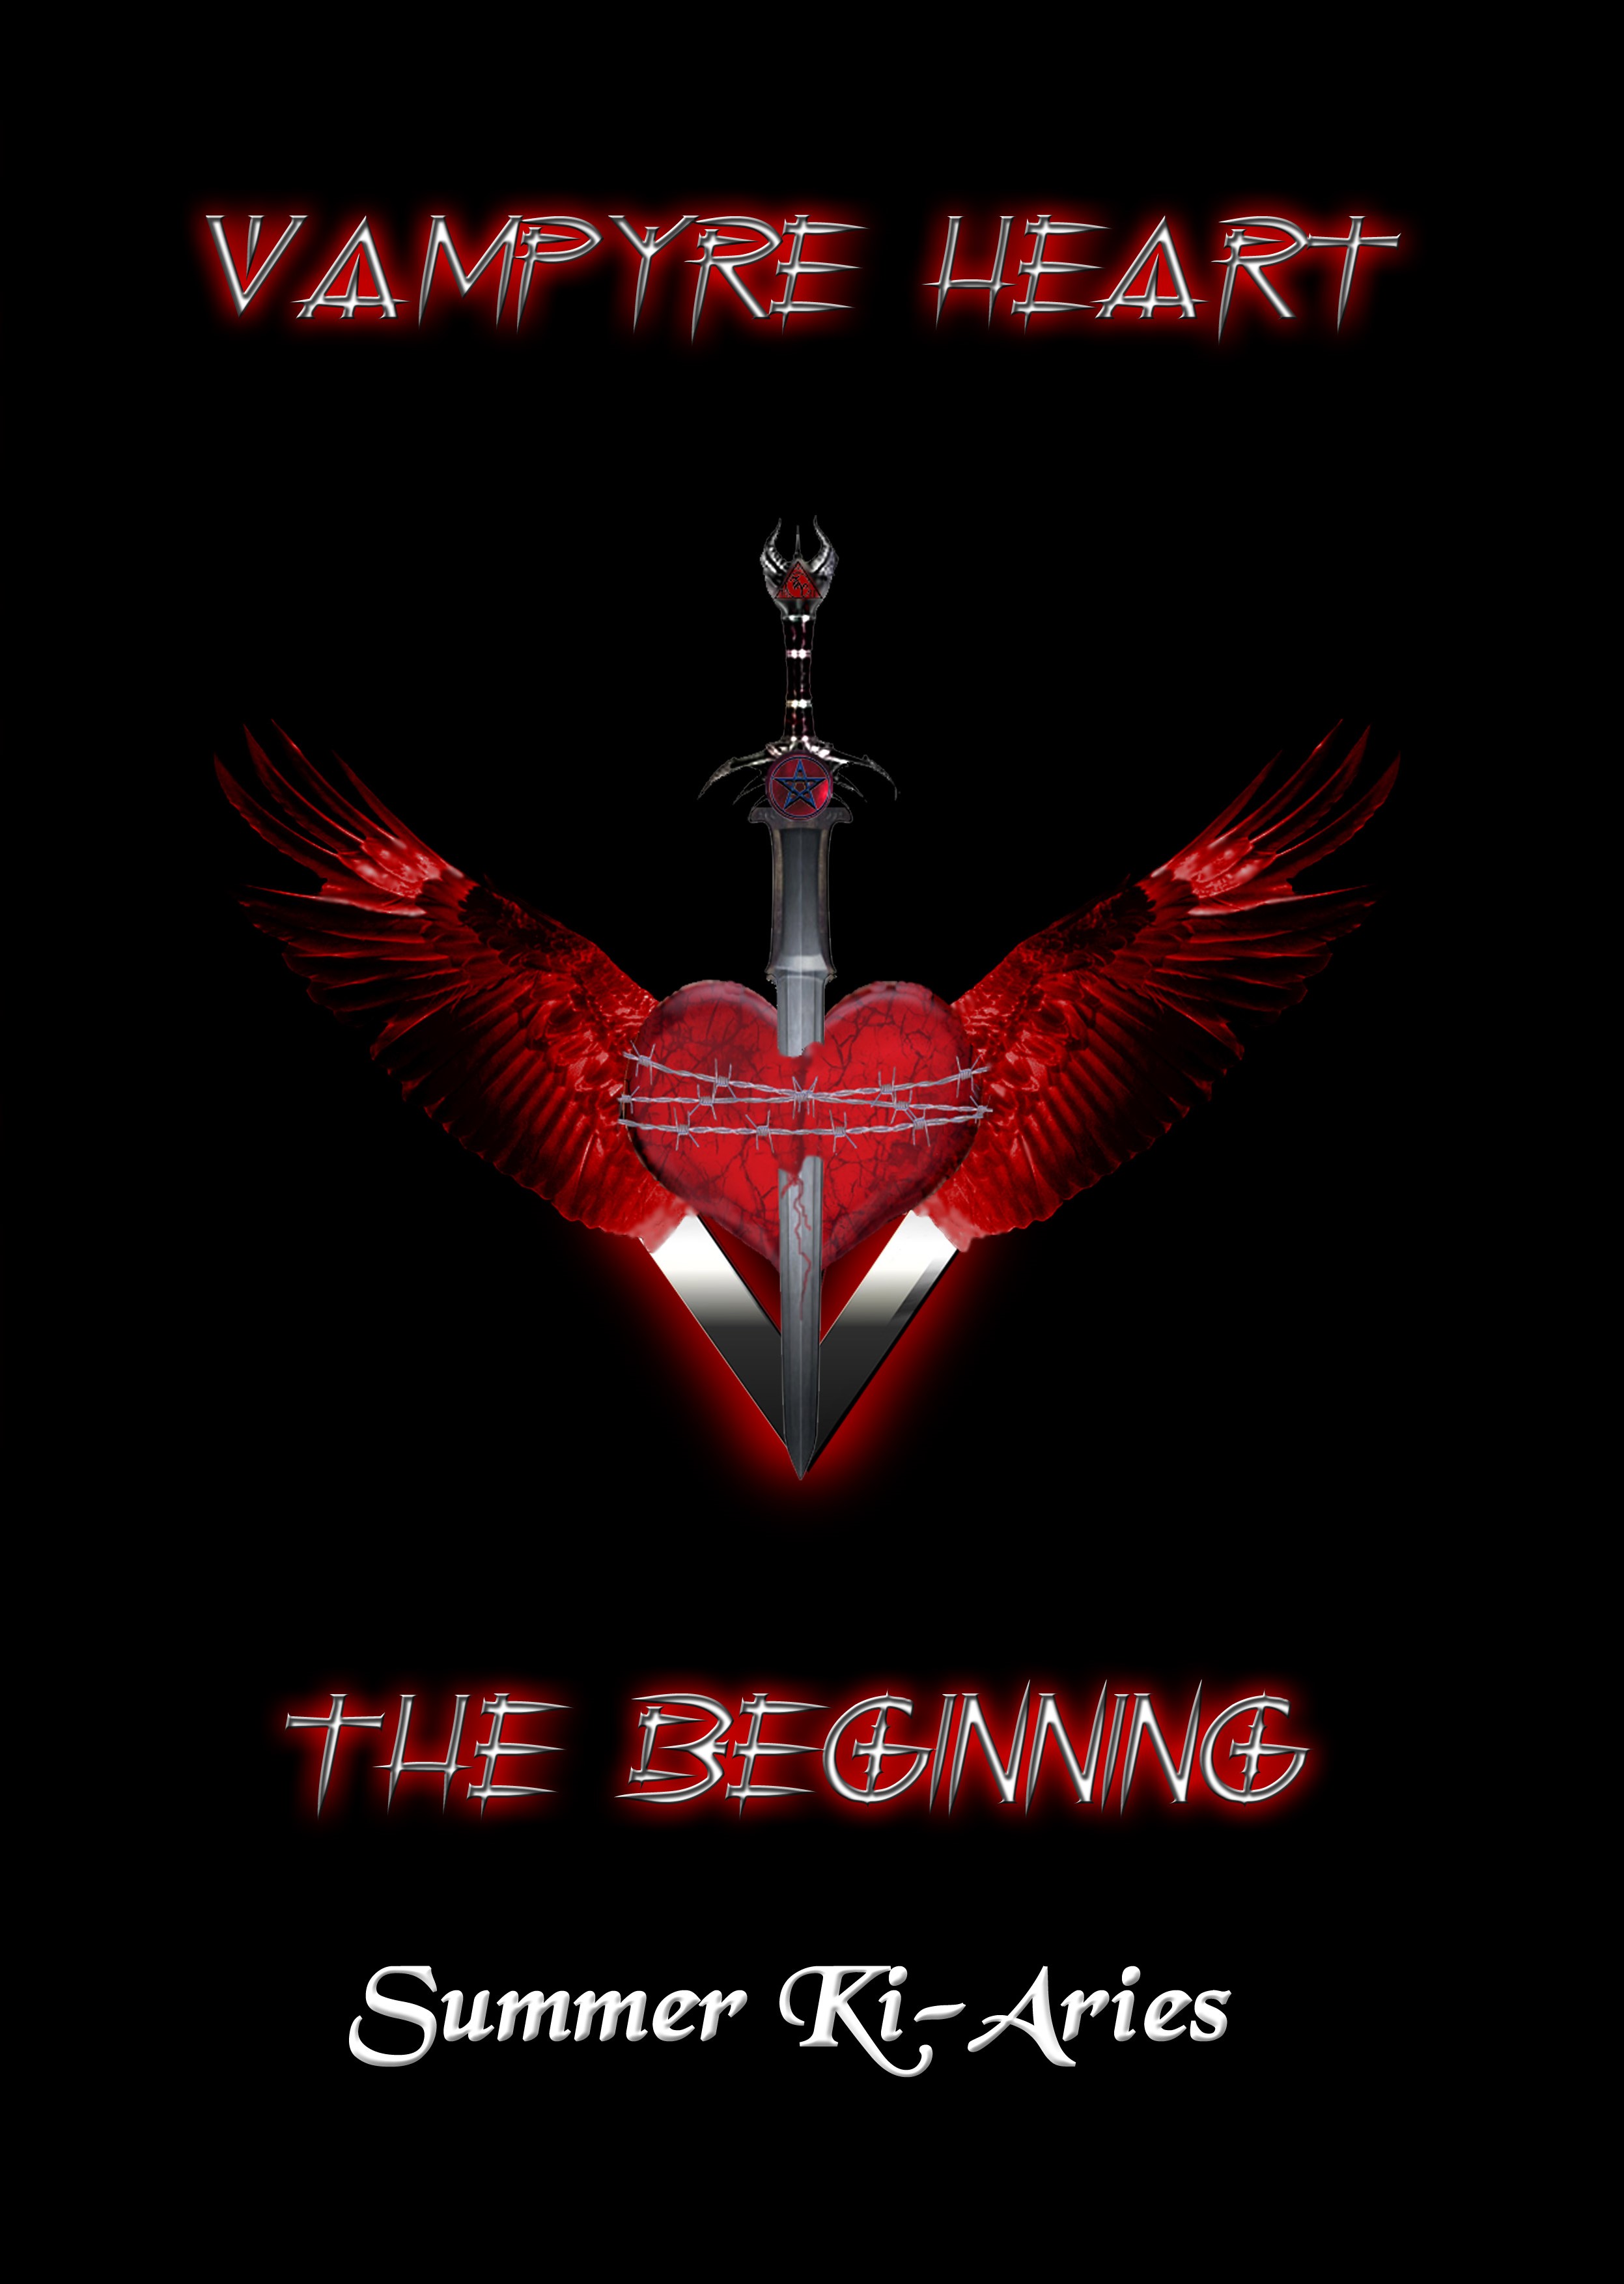 Vampyre Heart - The Beginning - Story Book Example Graphic